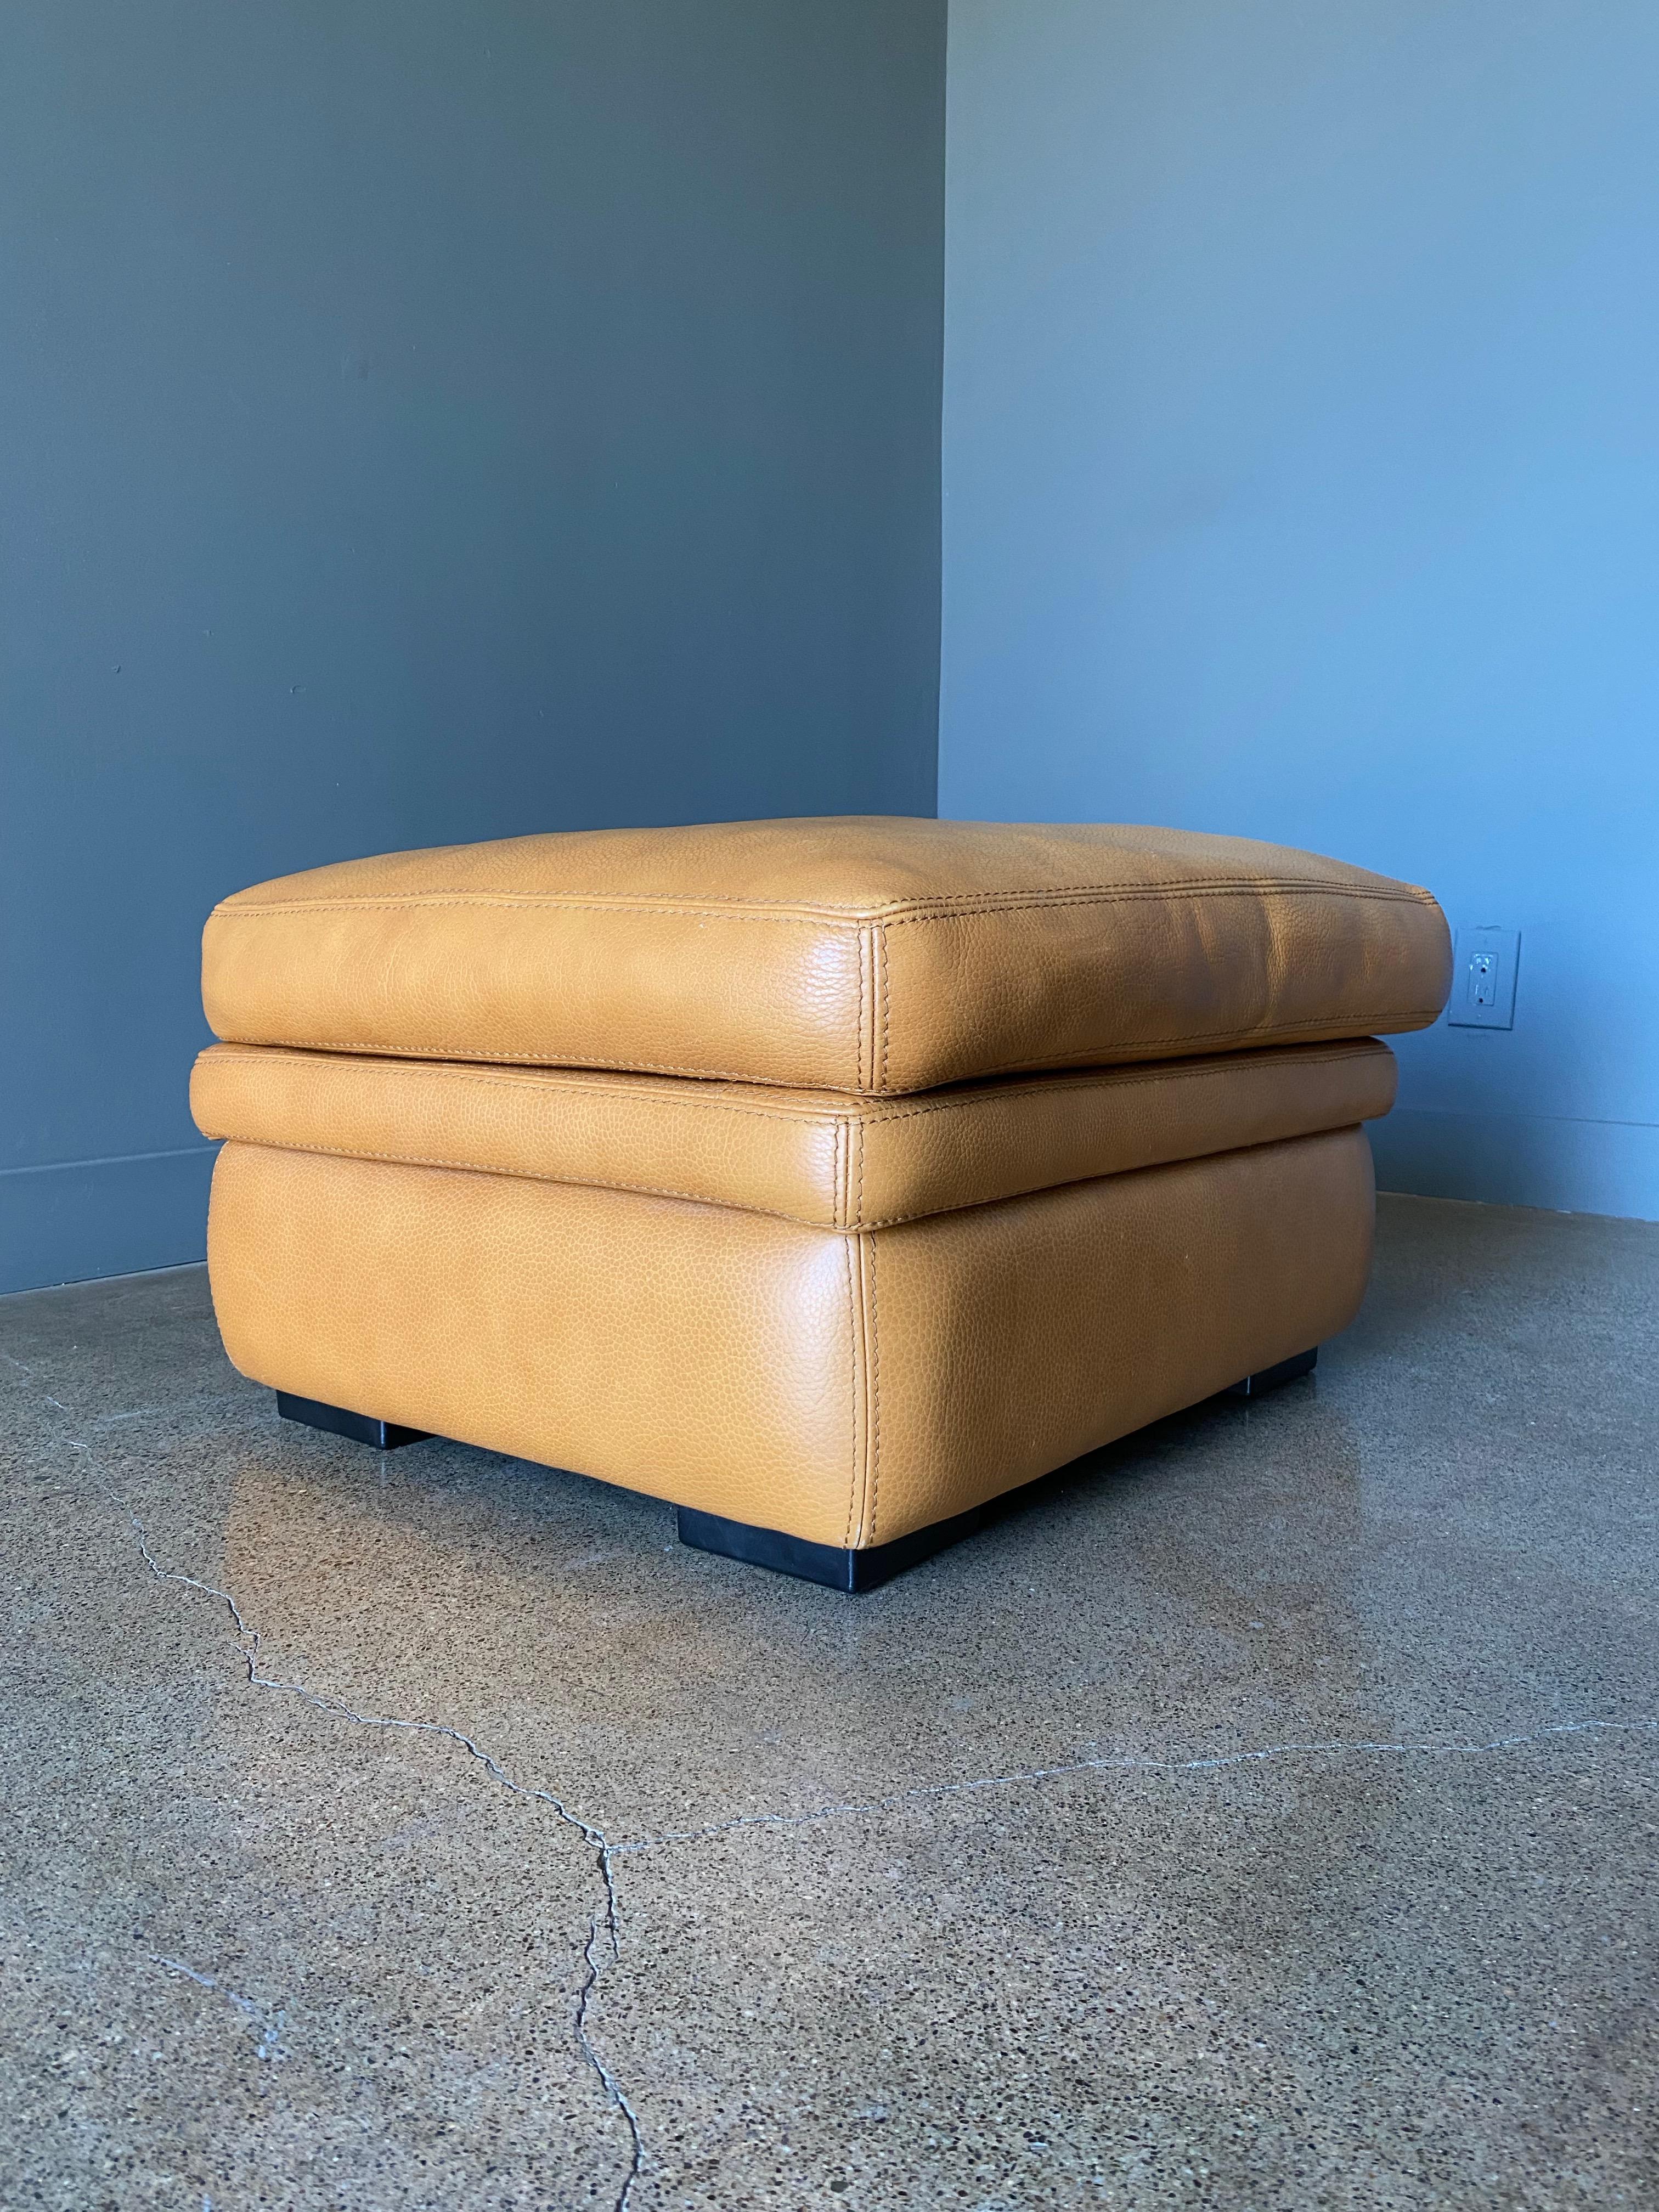 Hand-Crafted Post Modern Leather Ottoman by Roche Bobois, Circa 1989